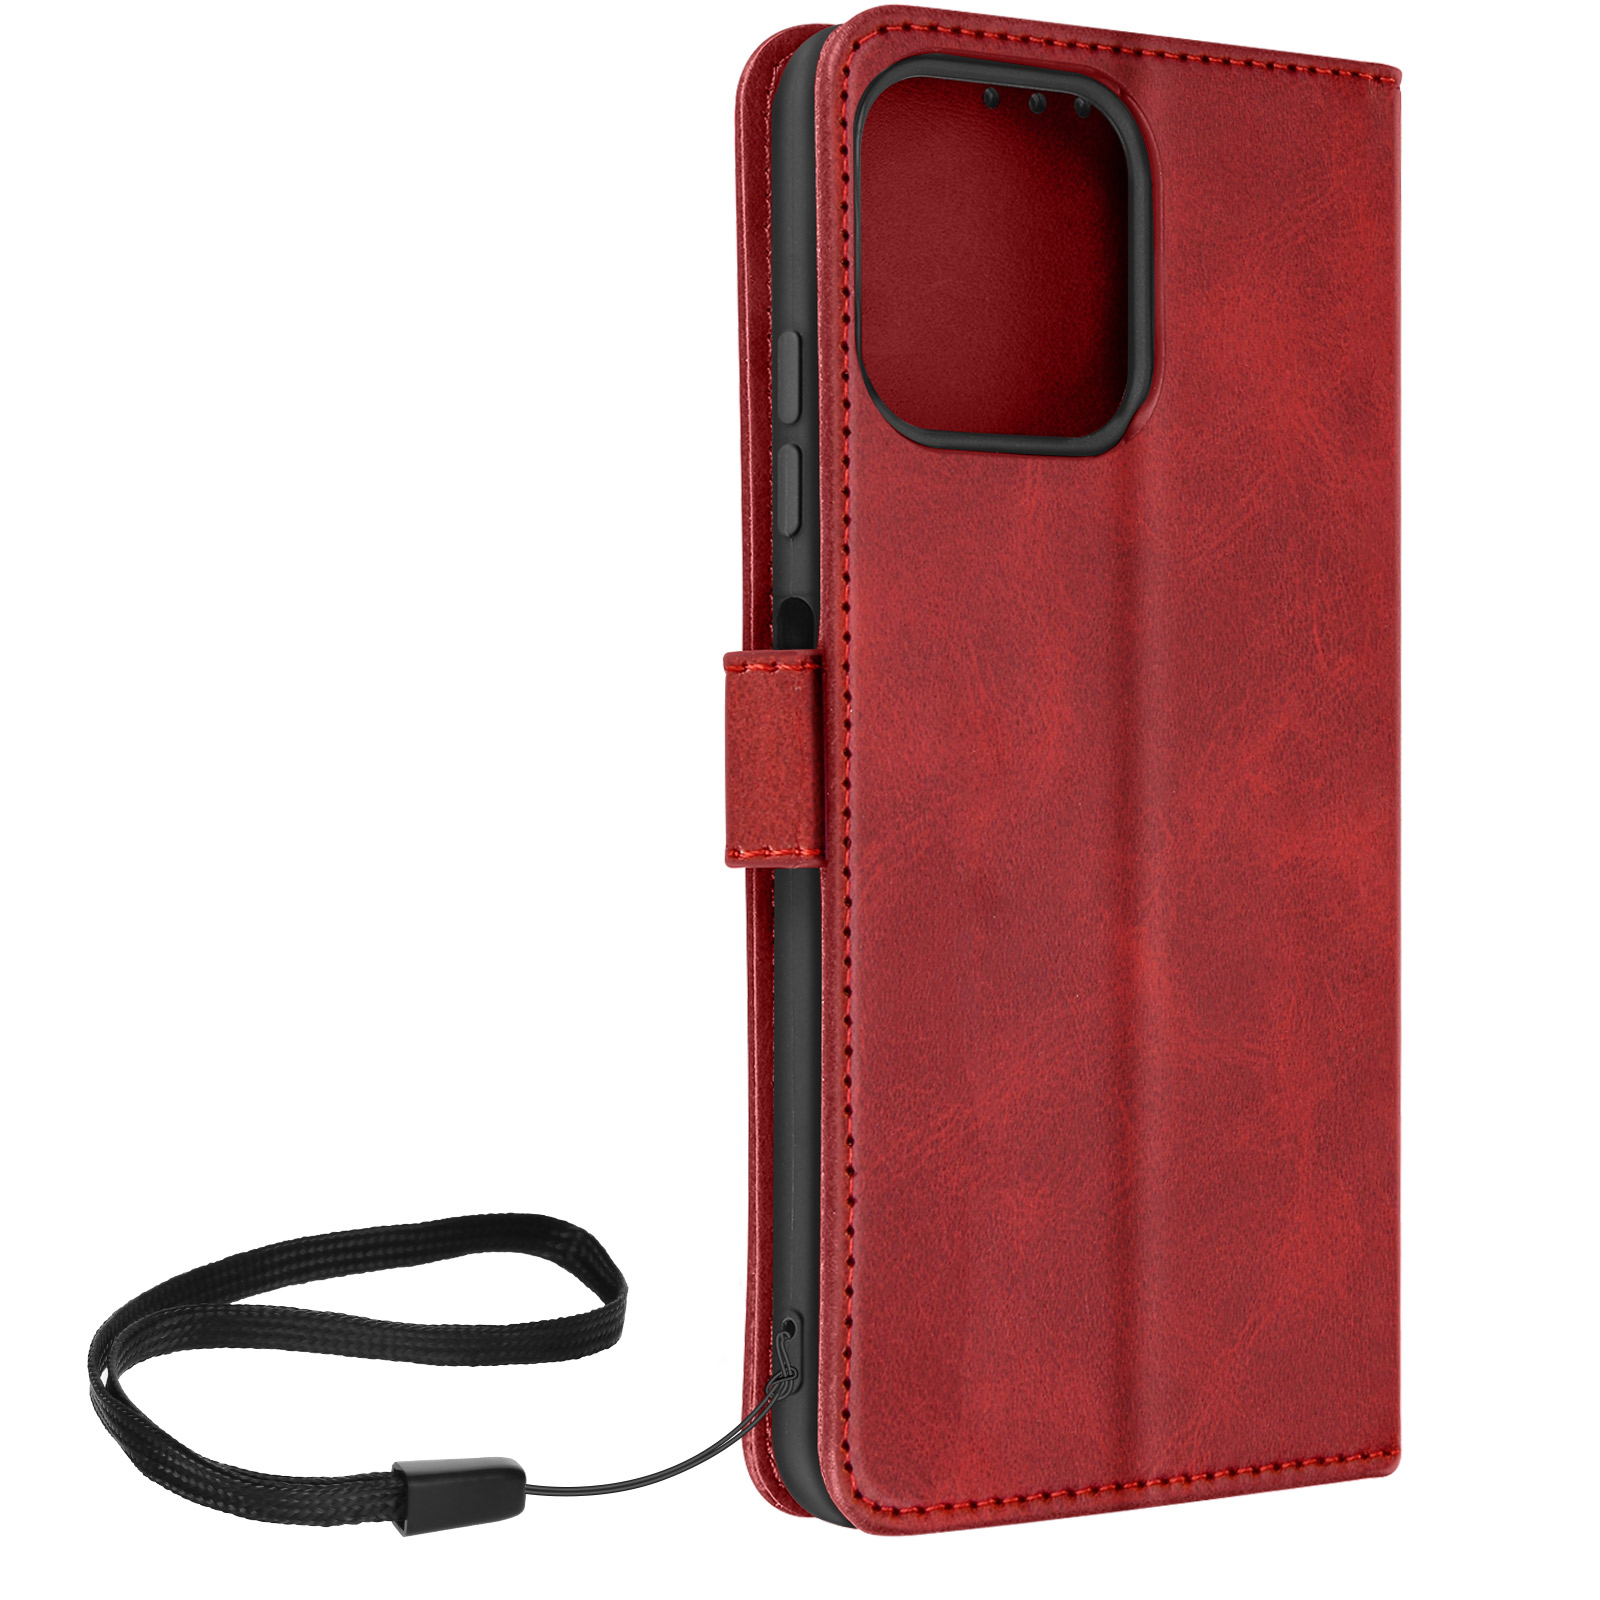 AVIZAR Bookstyle Series, Note Bookcover, 16 Pro, Ulefone, Rot